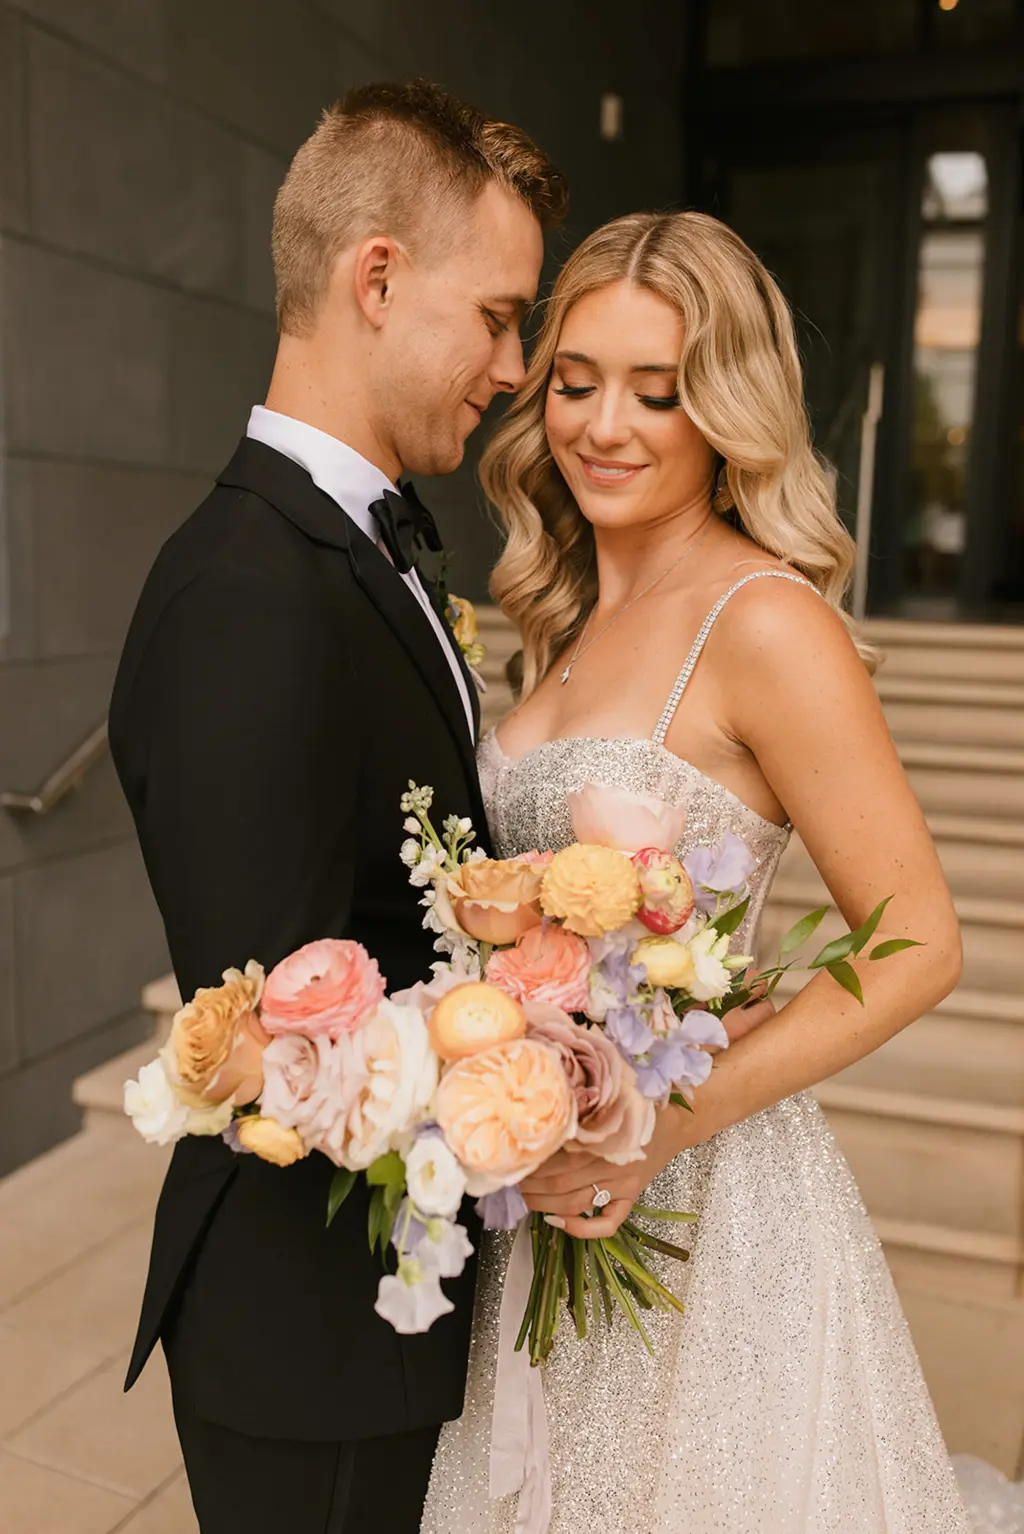 Spring Wedding Bridal Bouquet Inspiration with Pastel Orange and Pink Roses, Greenery, and Ranunculus | Bridal Hair and Makeup by Tampa Bay HMUA Femme Akoi Beauty Studio | Tampa Planner Coastal Coordinating